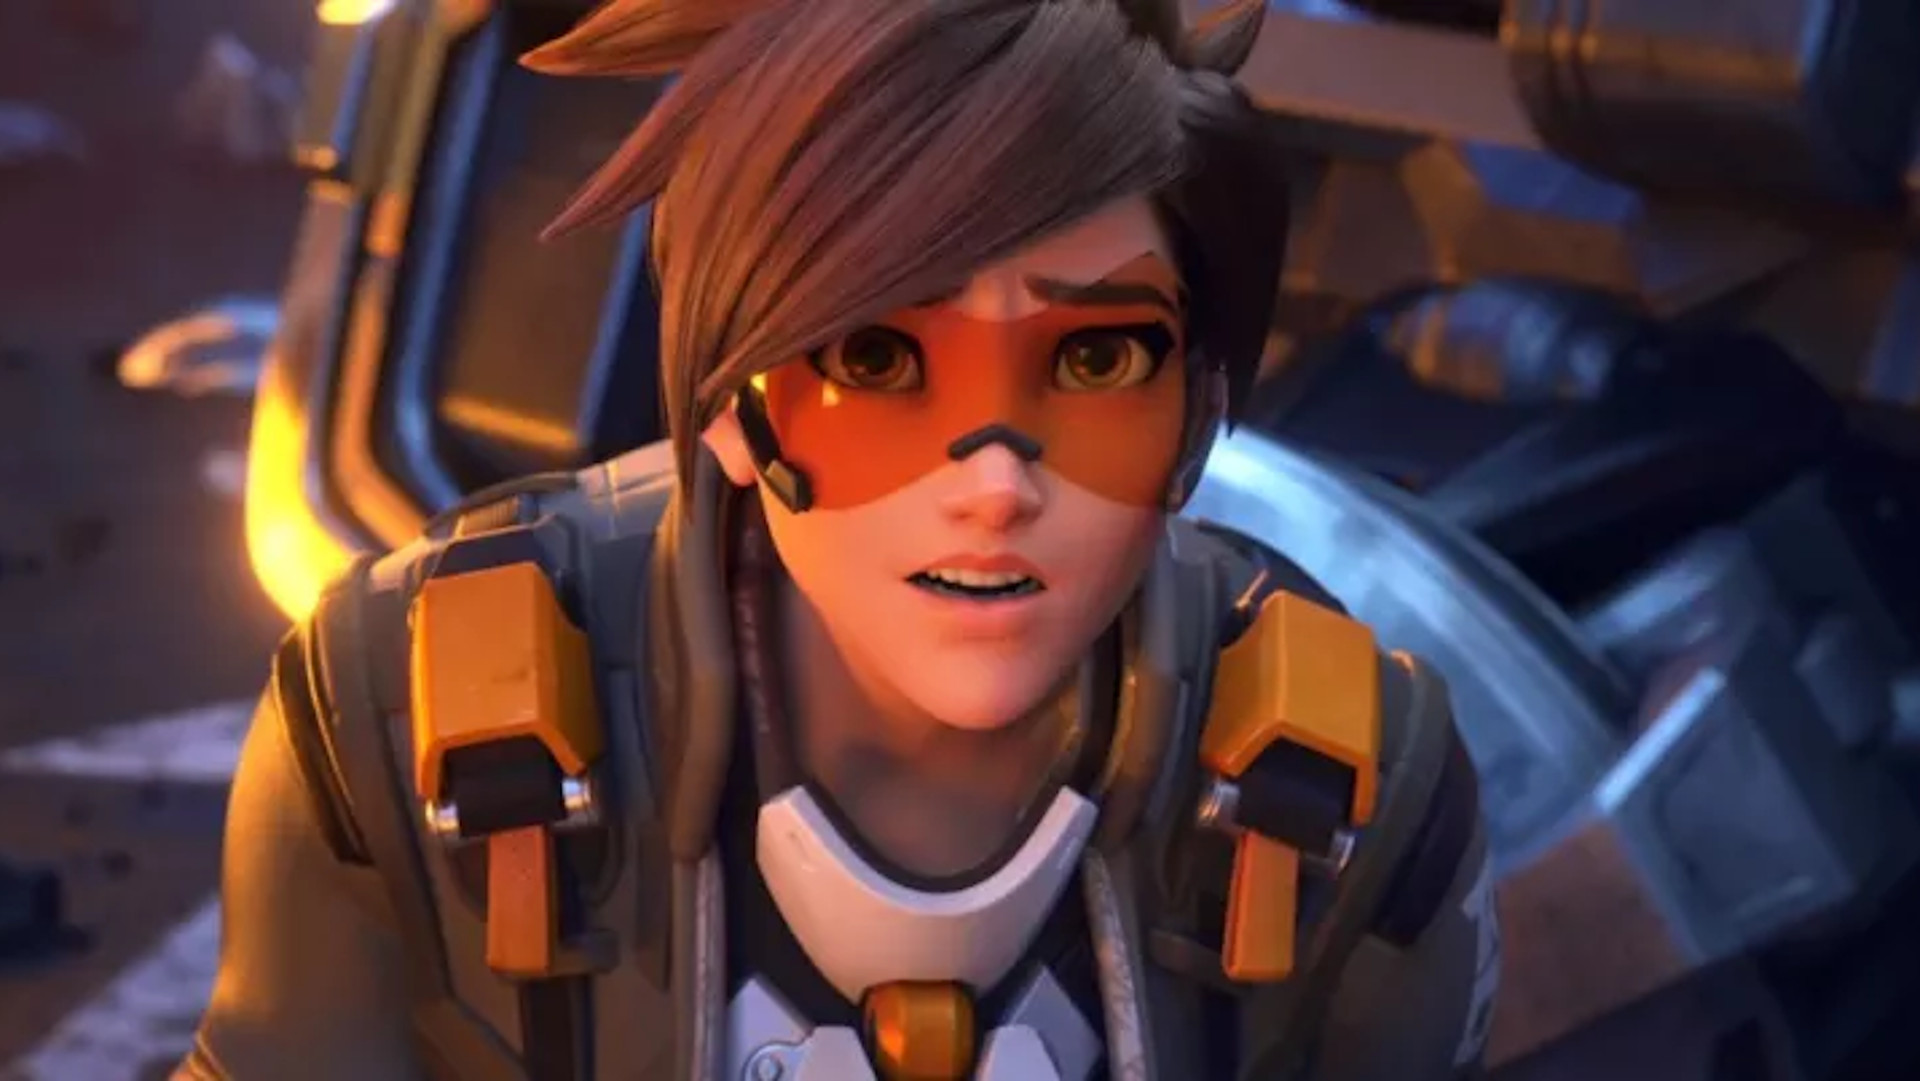  Overwatch 2's new phone requirement is locking players out: 'I can't just change my phone plan for one game' 